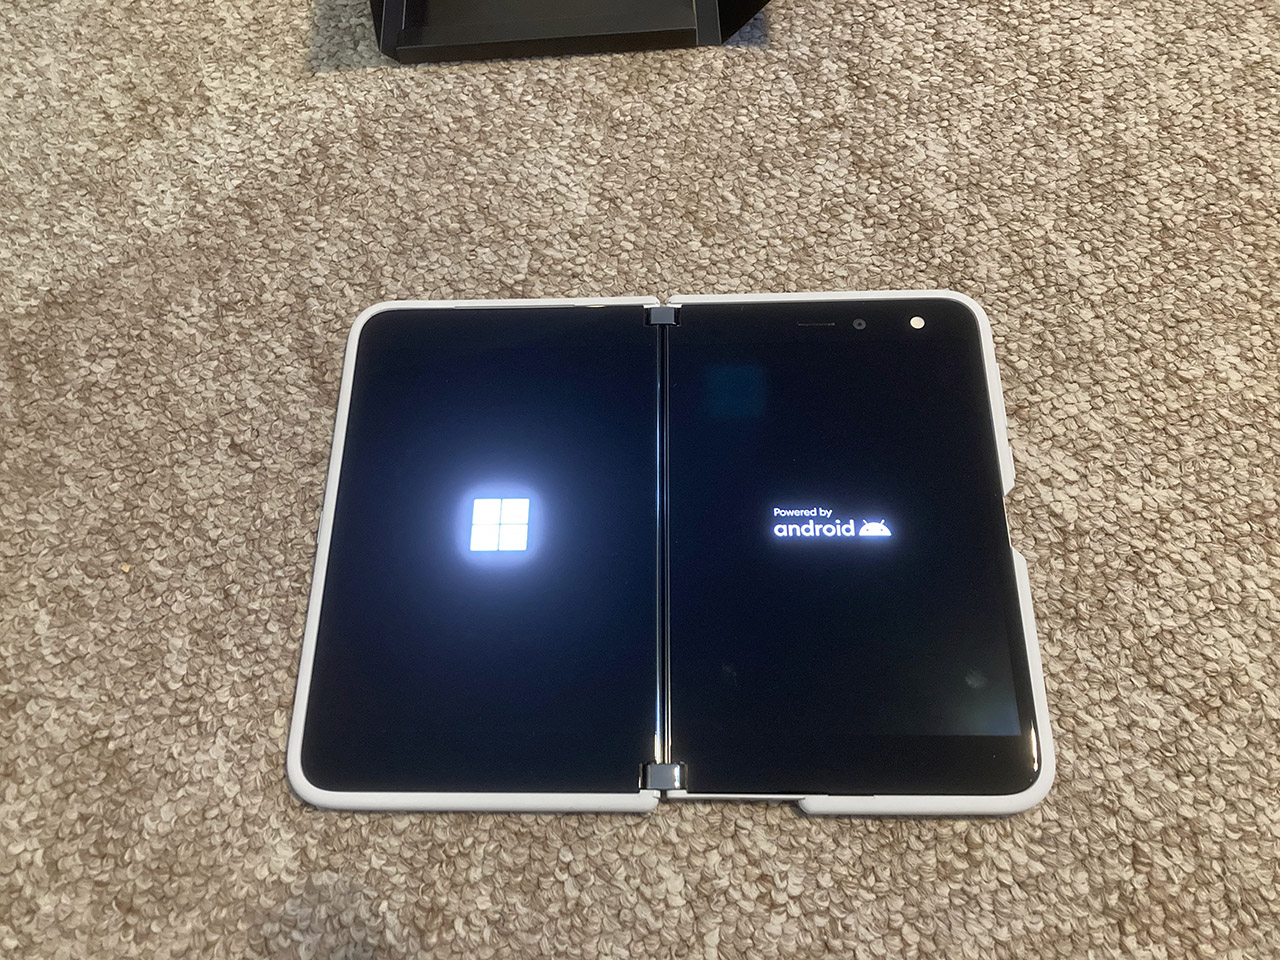 Microsoft Surface Duo - Powered by Android